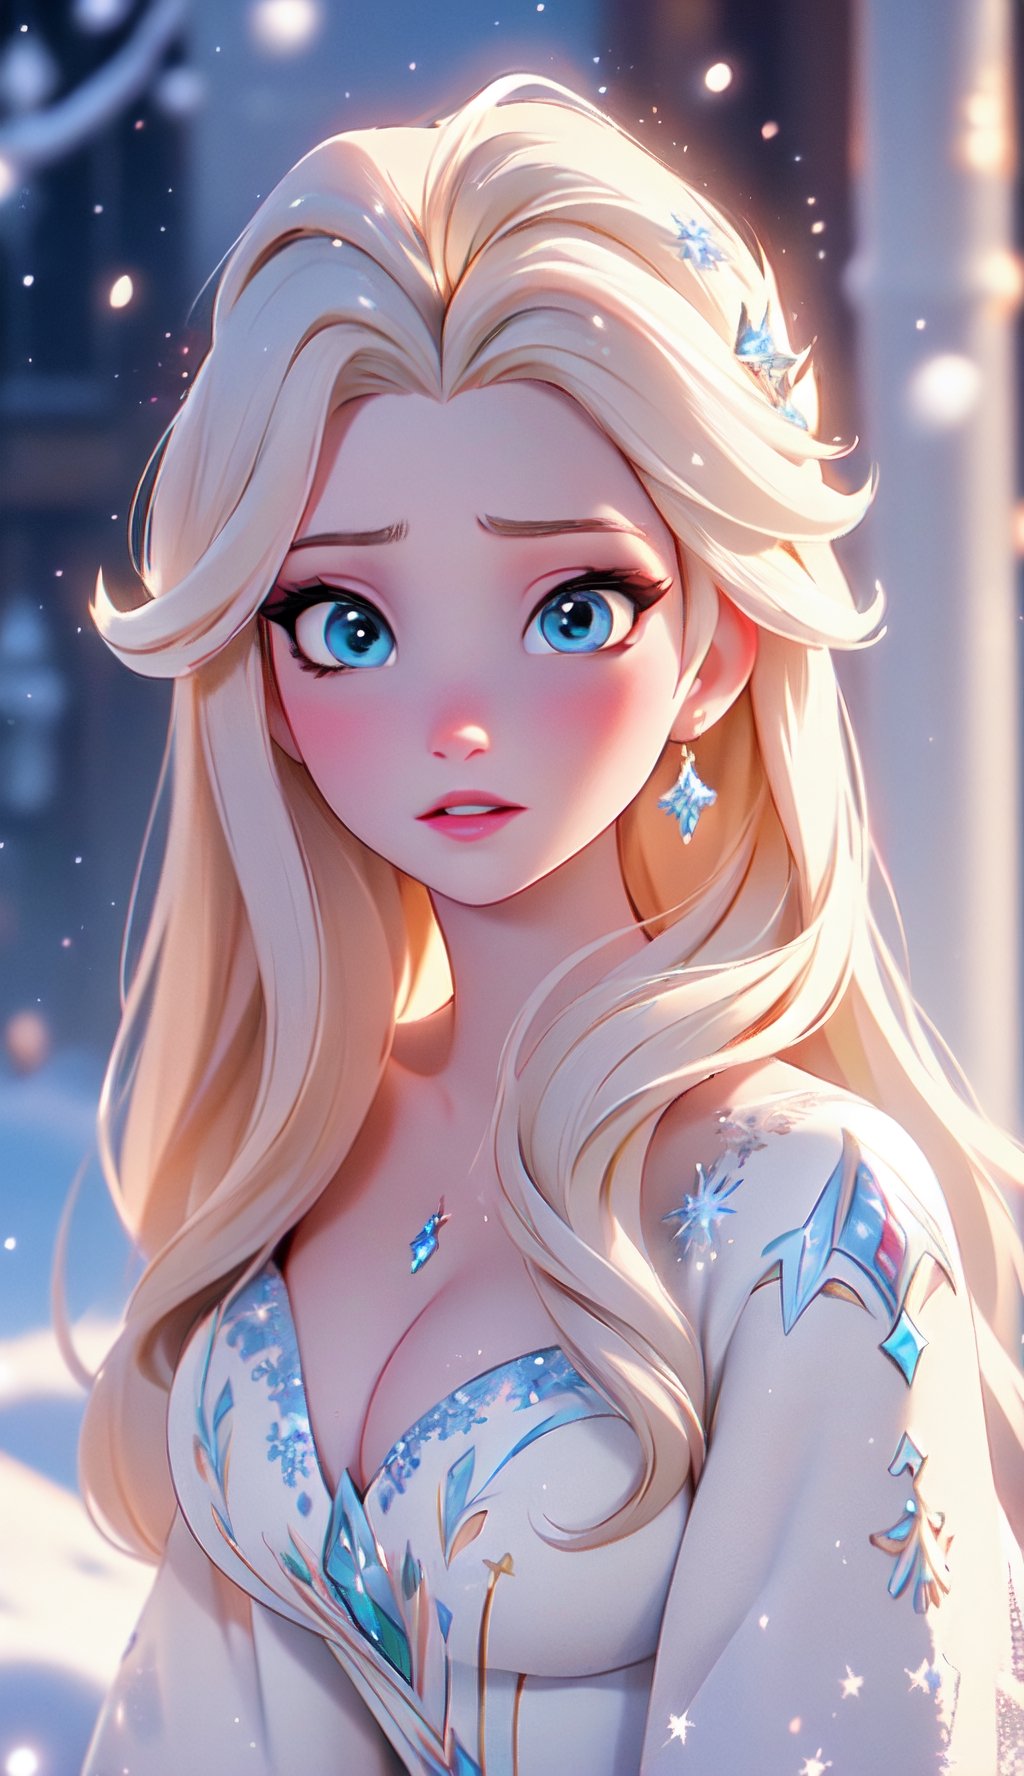 close up of face, Elsa from Frozen, (best quality, masterpiece, ultra detailed, highres, RAW image), perfect facial features, pale skin, blushing, blonde, long tousled hair, perfect eyes, perfect proportions, prestigeous, delicate, romantic, Elizabethan woman, winter christmas clothes, cleavage, romanticism, hirao style, snowy Christmas village in far background, snow field, pine trees, mountains, sunlight from above to give heavenly feeling, glitter, (falling snow), snowflakes, realistic.